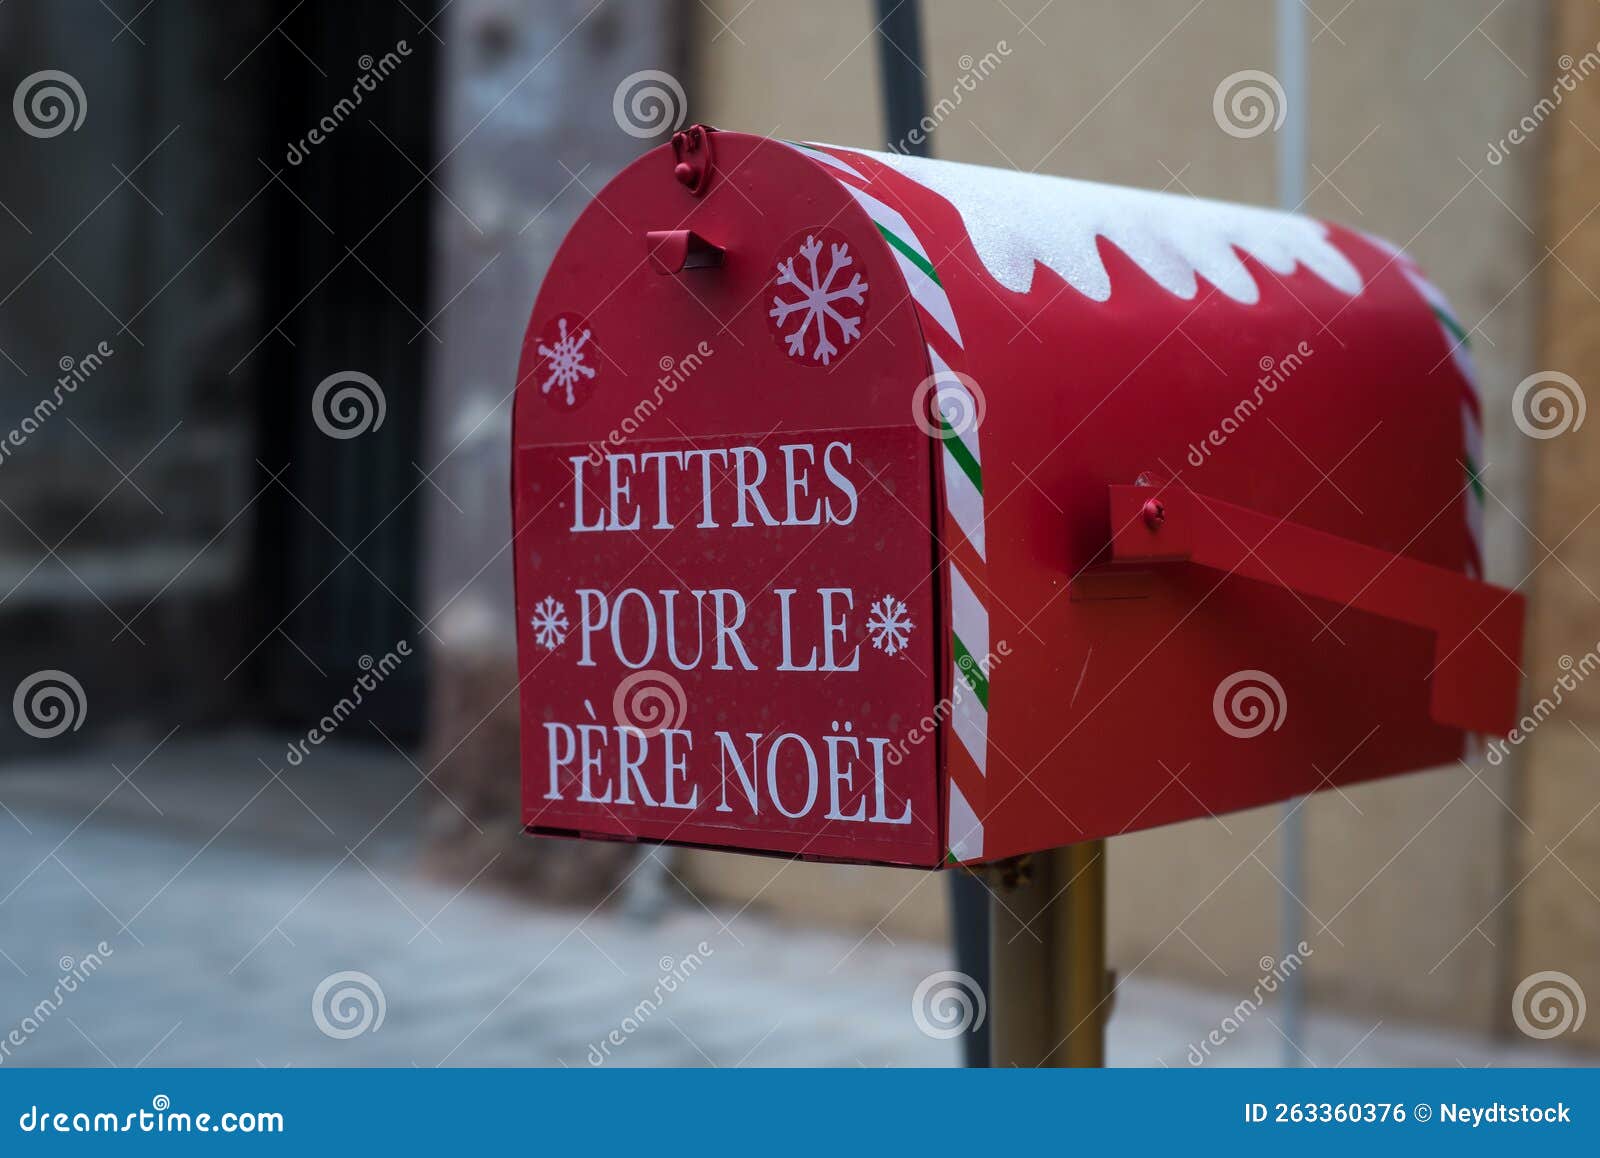 mail box with text in french : lettres pour le pere noel, traduction in english, letters forthe santa claus